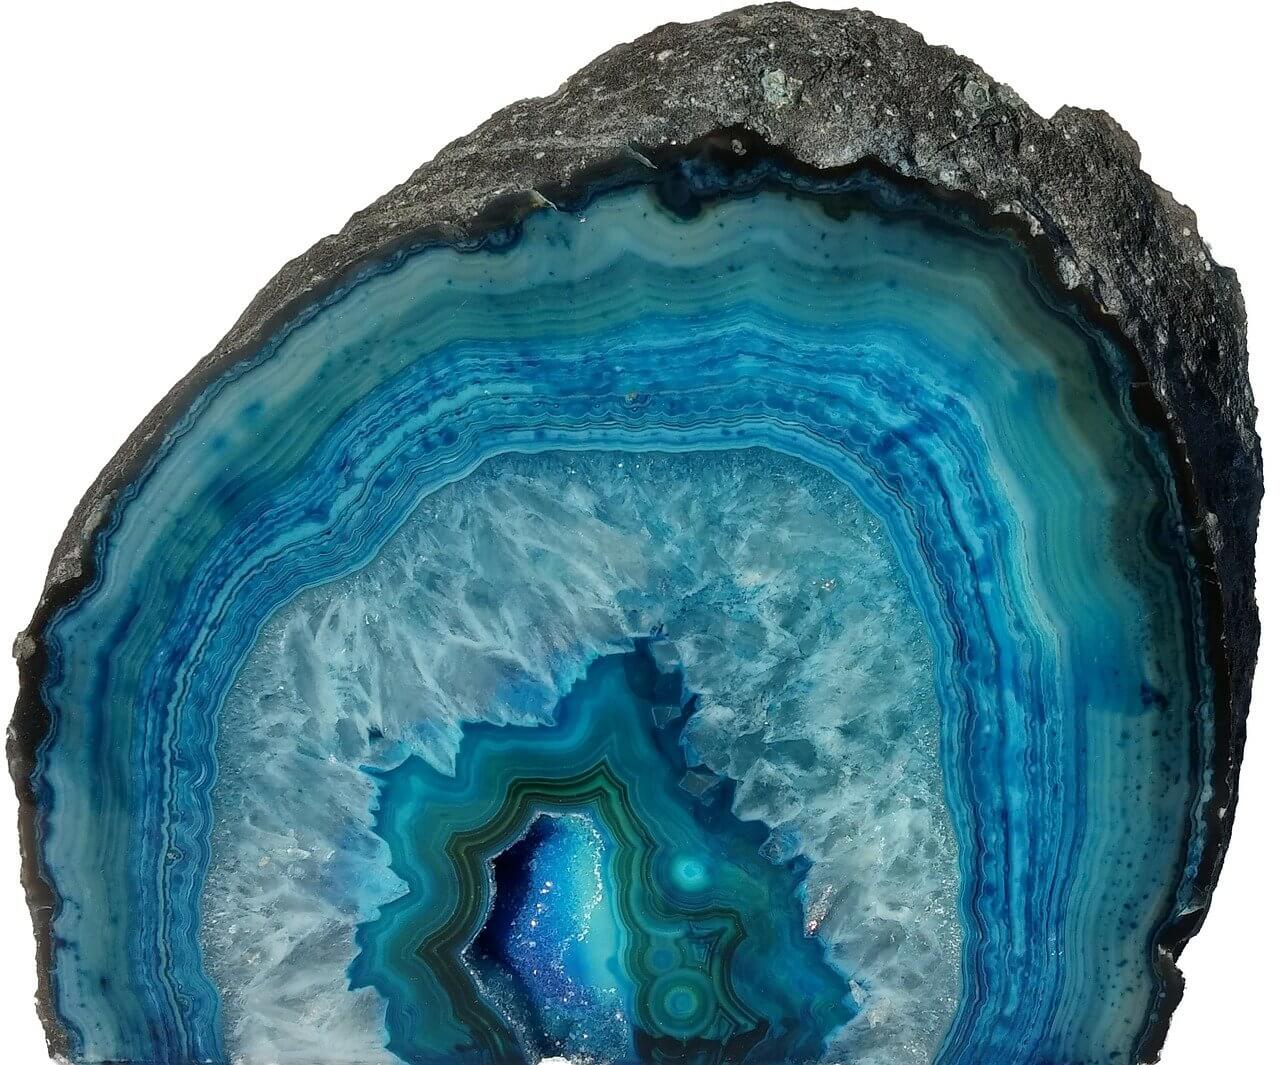 Agate Mineral Definition, Properties and Amateur Lapidaries